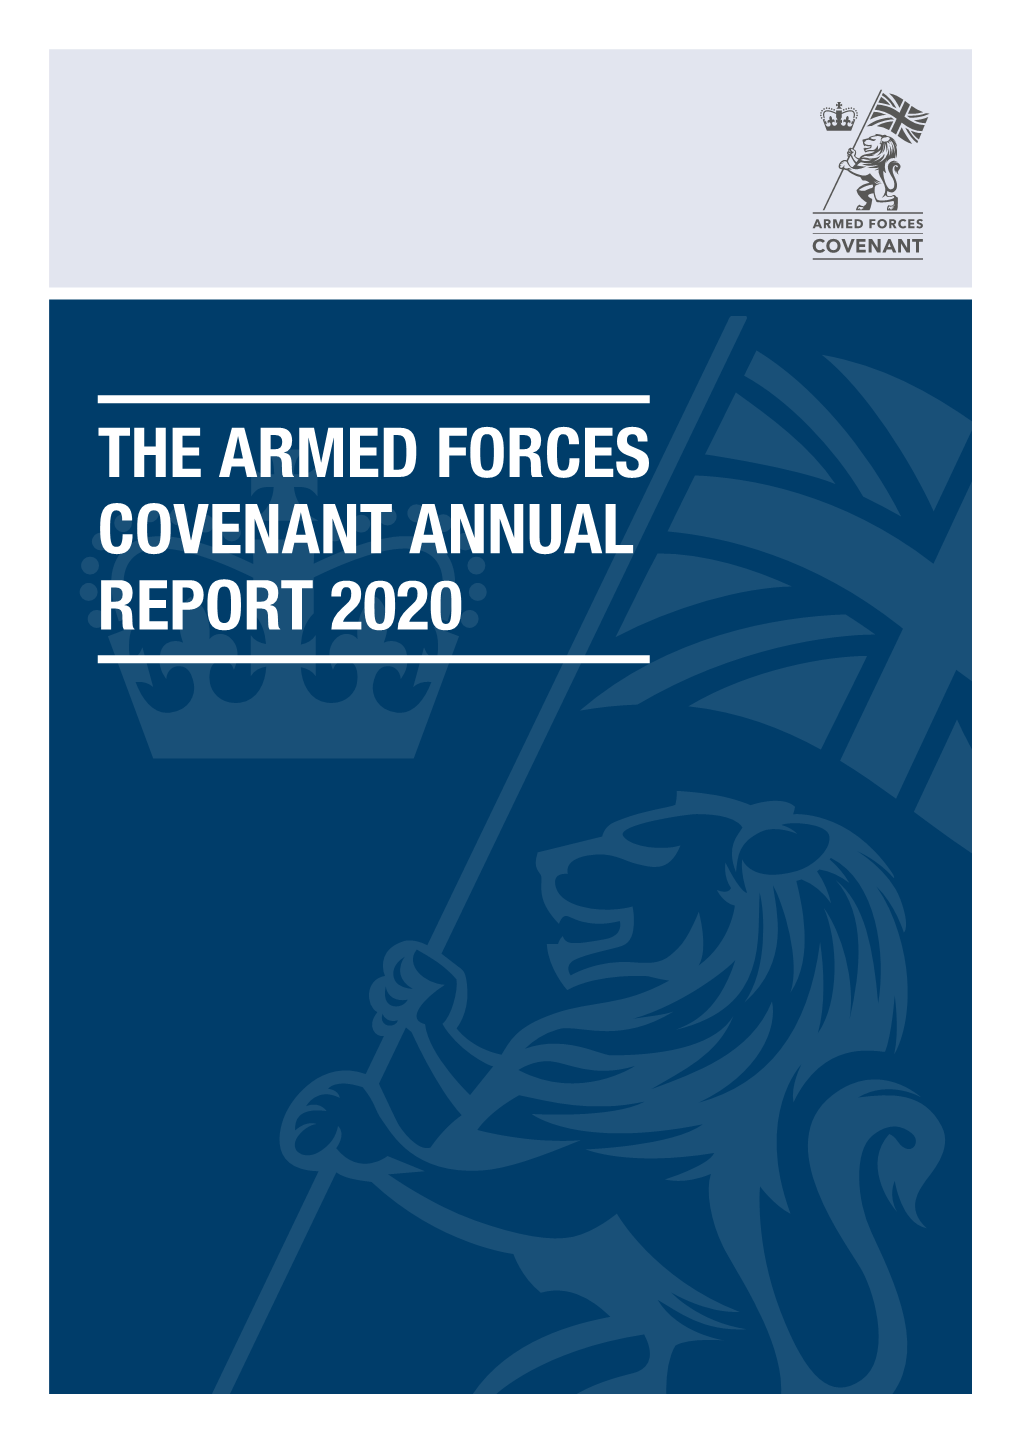 The Armed Forces Covenant Annual Report 2020